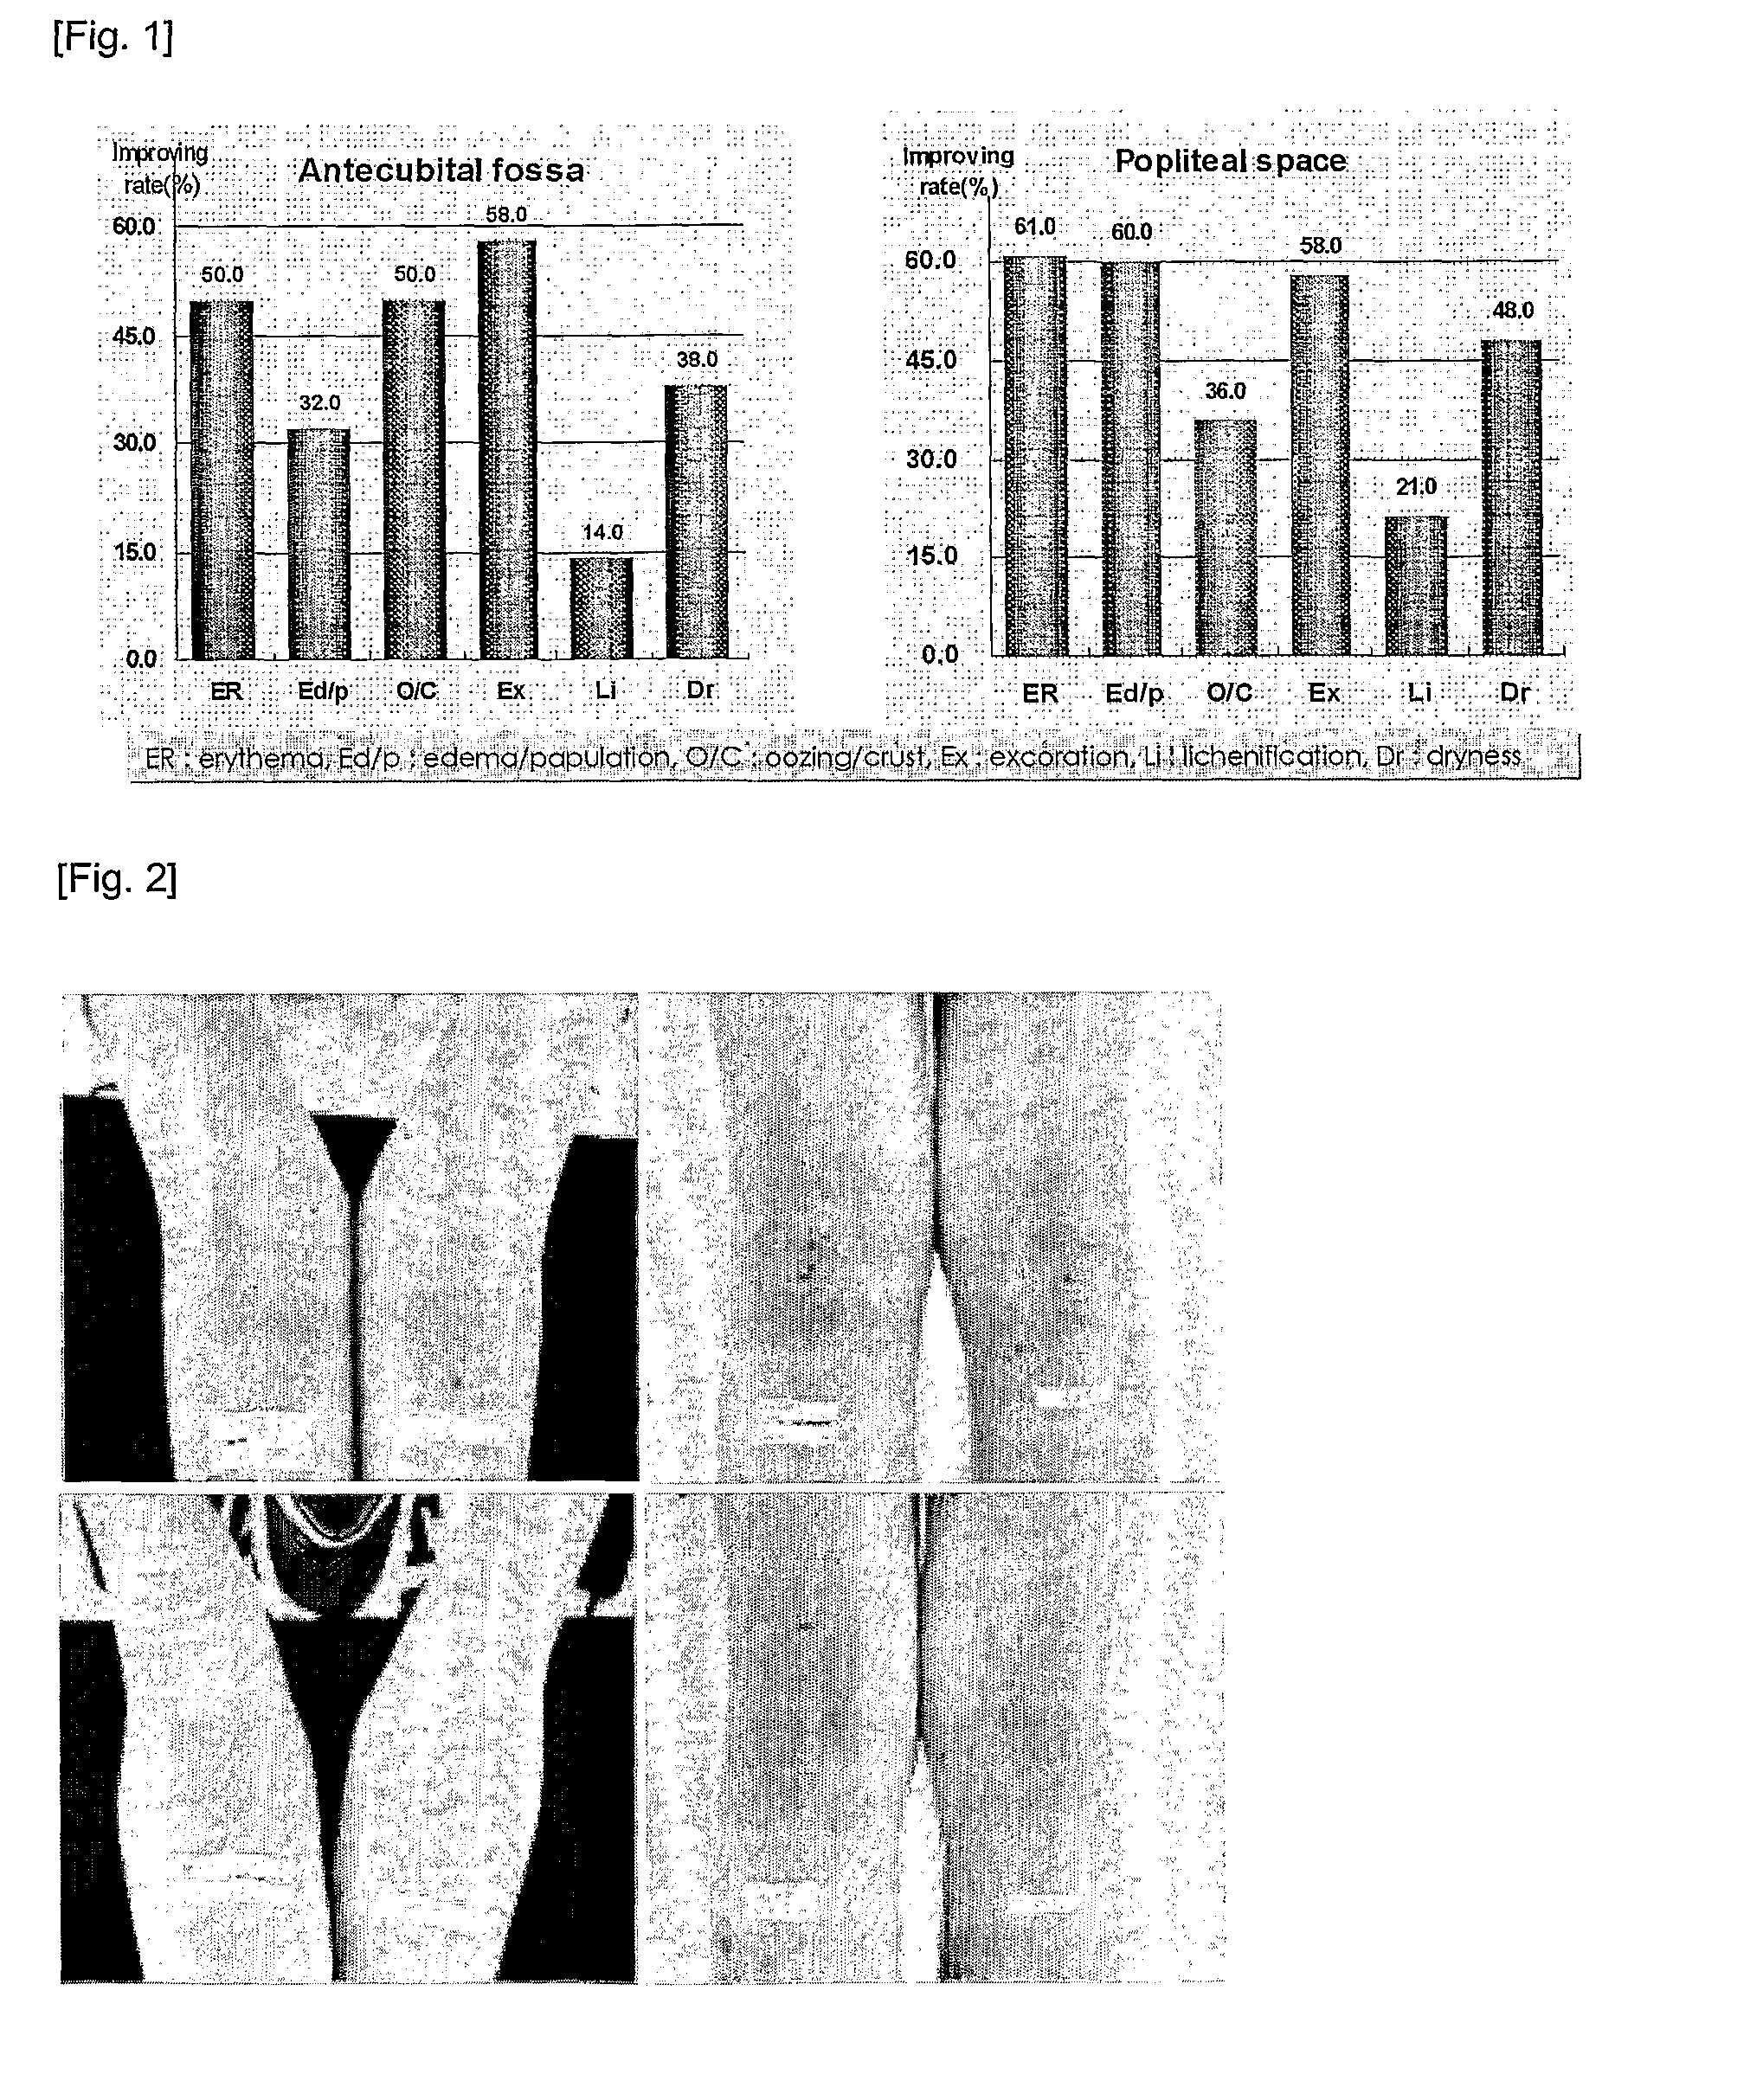 Composition for treating atopic dermatitis comprising extracts of bamboo and Scutellaria